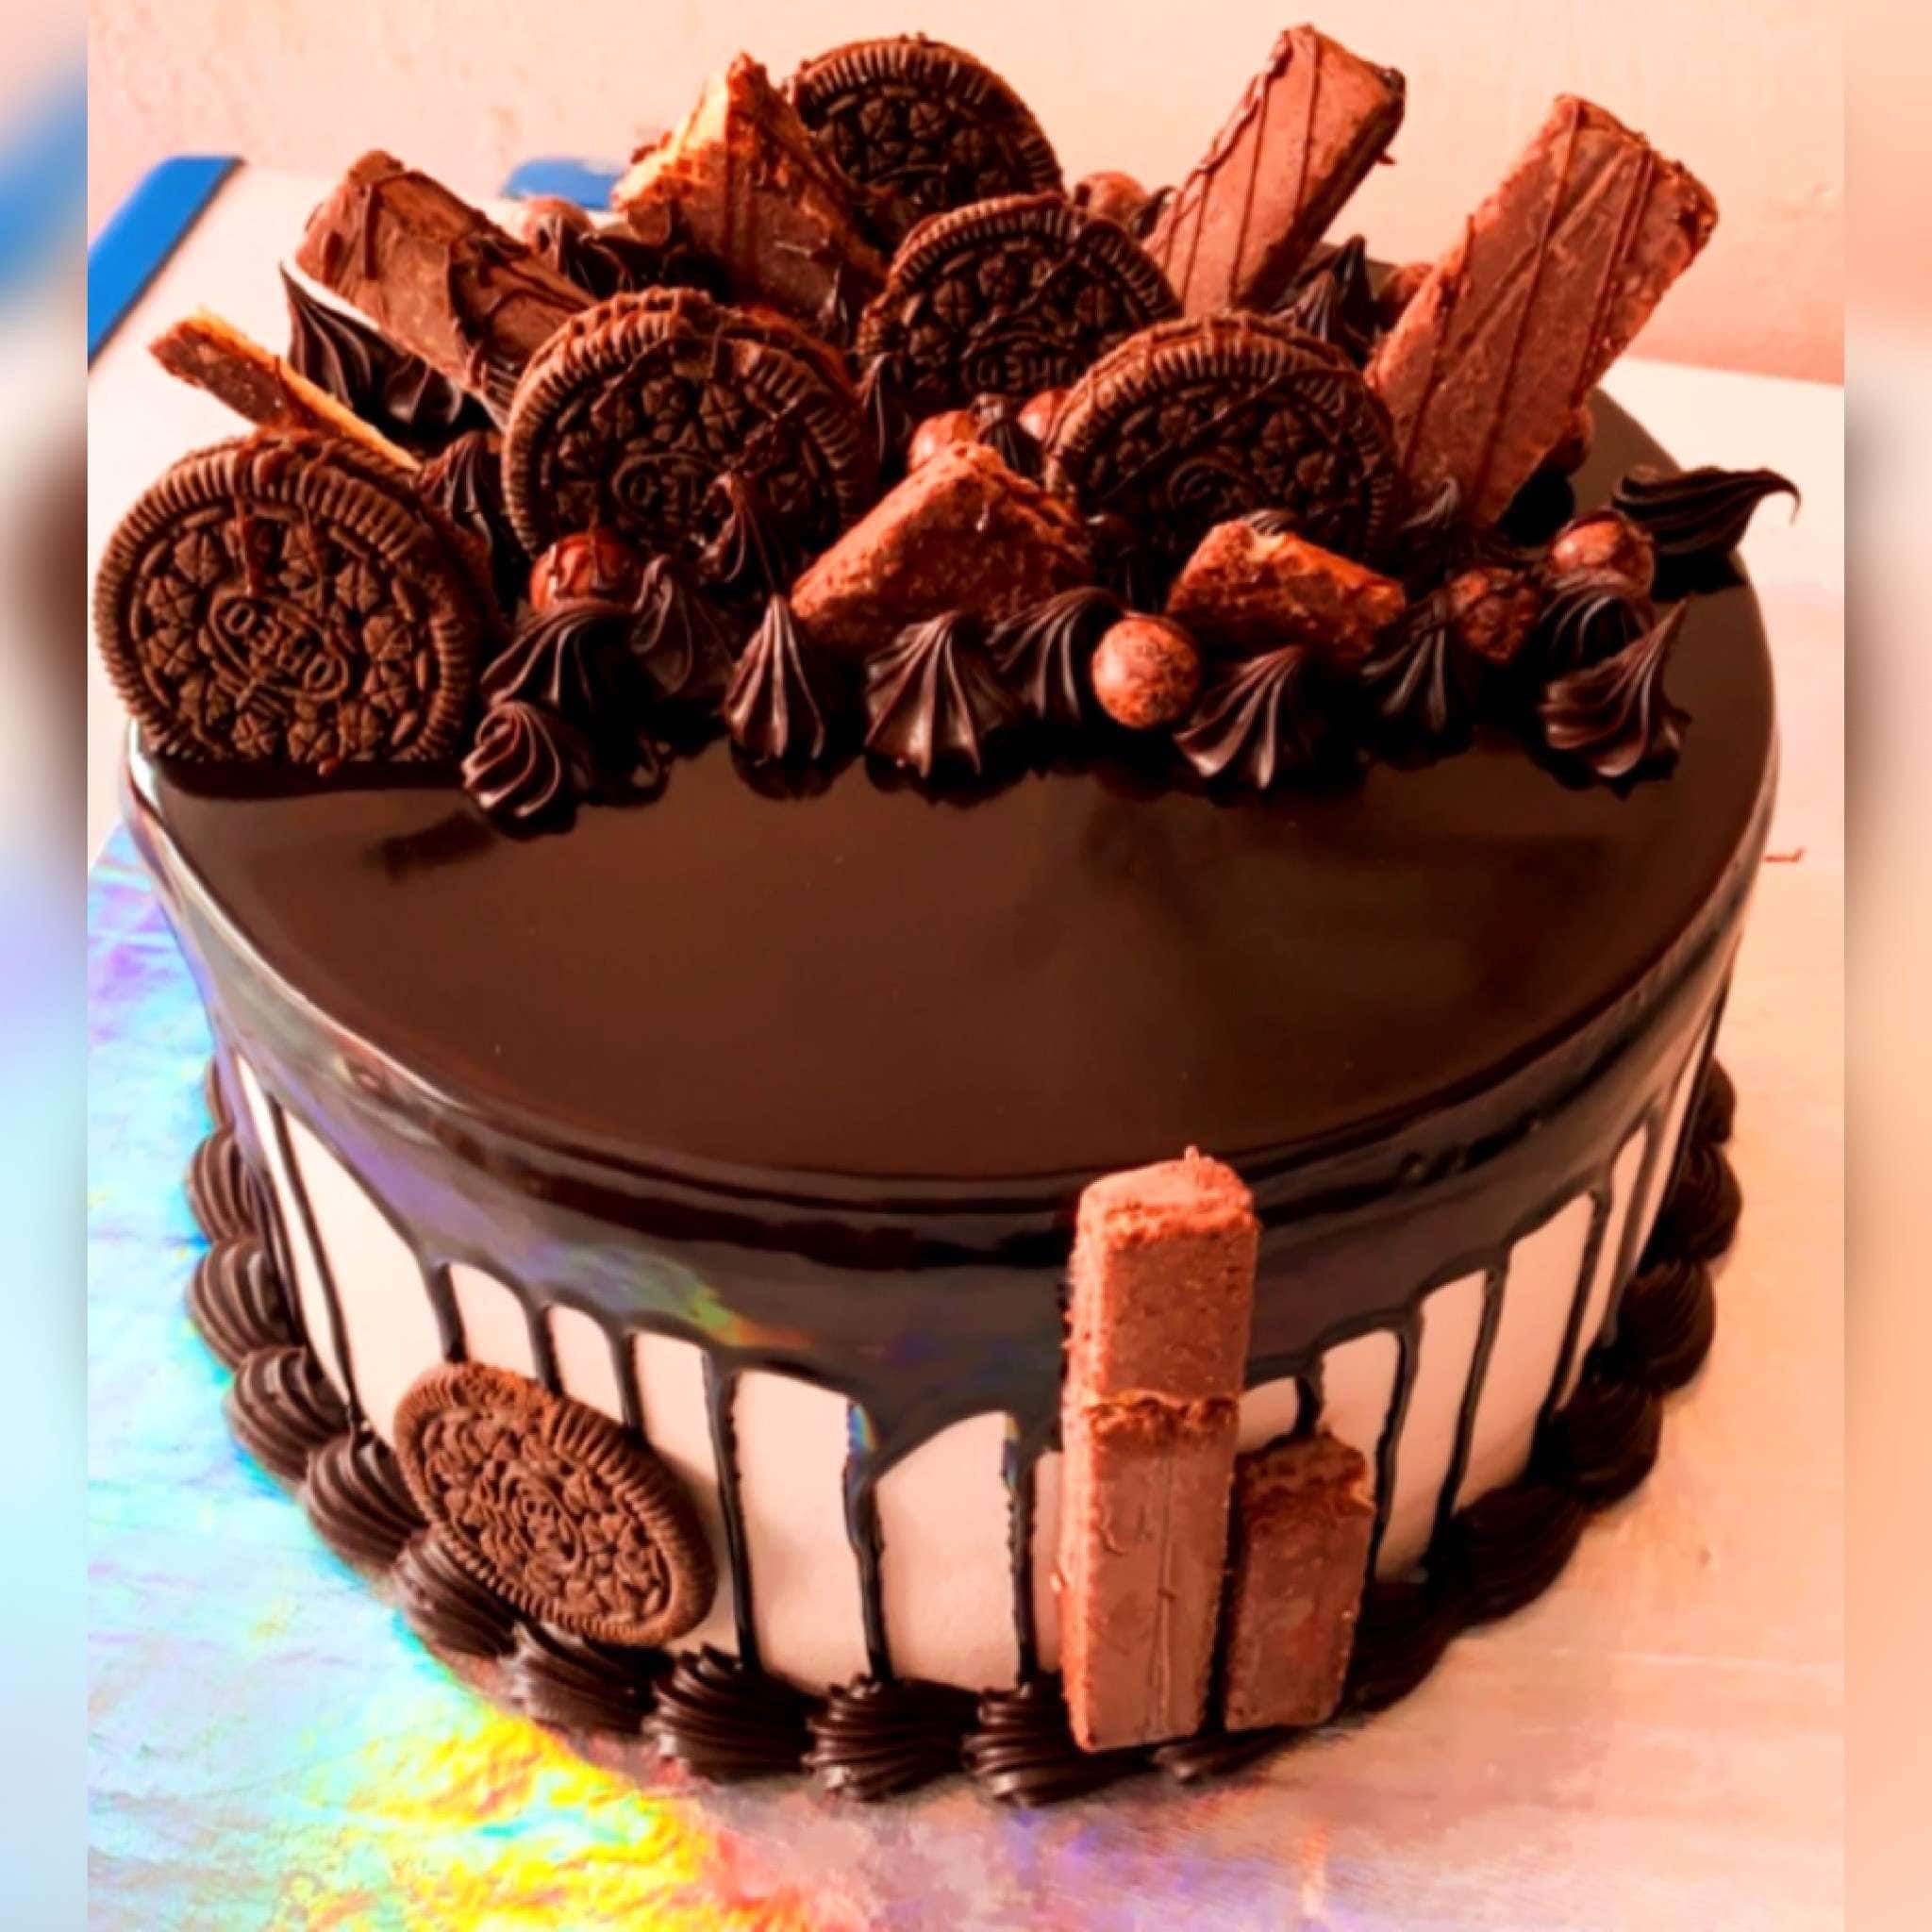 Chocolate Delight Cake Shop, Electronic City order online - Zomato